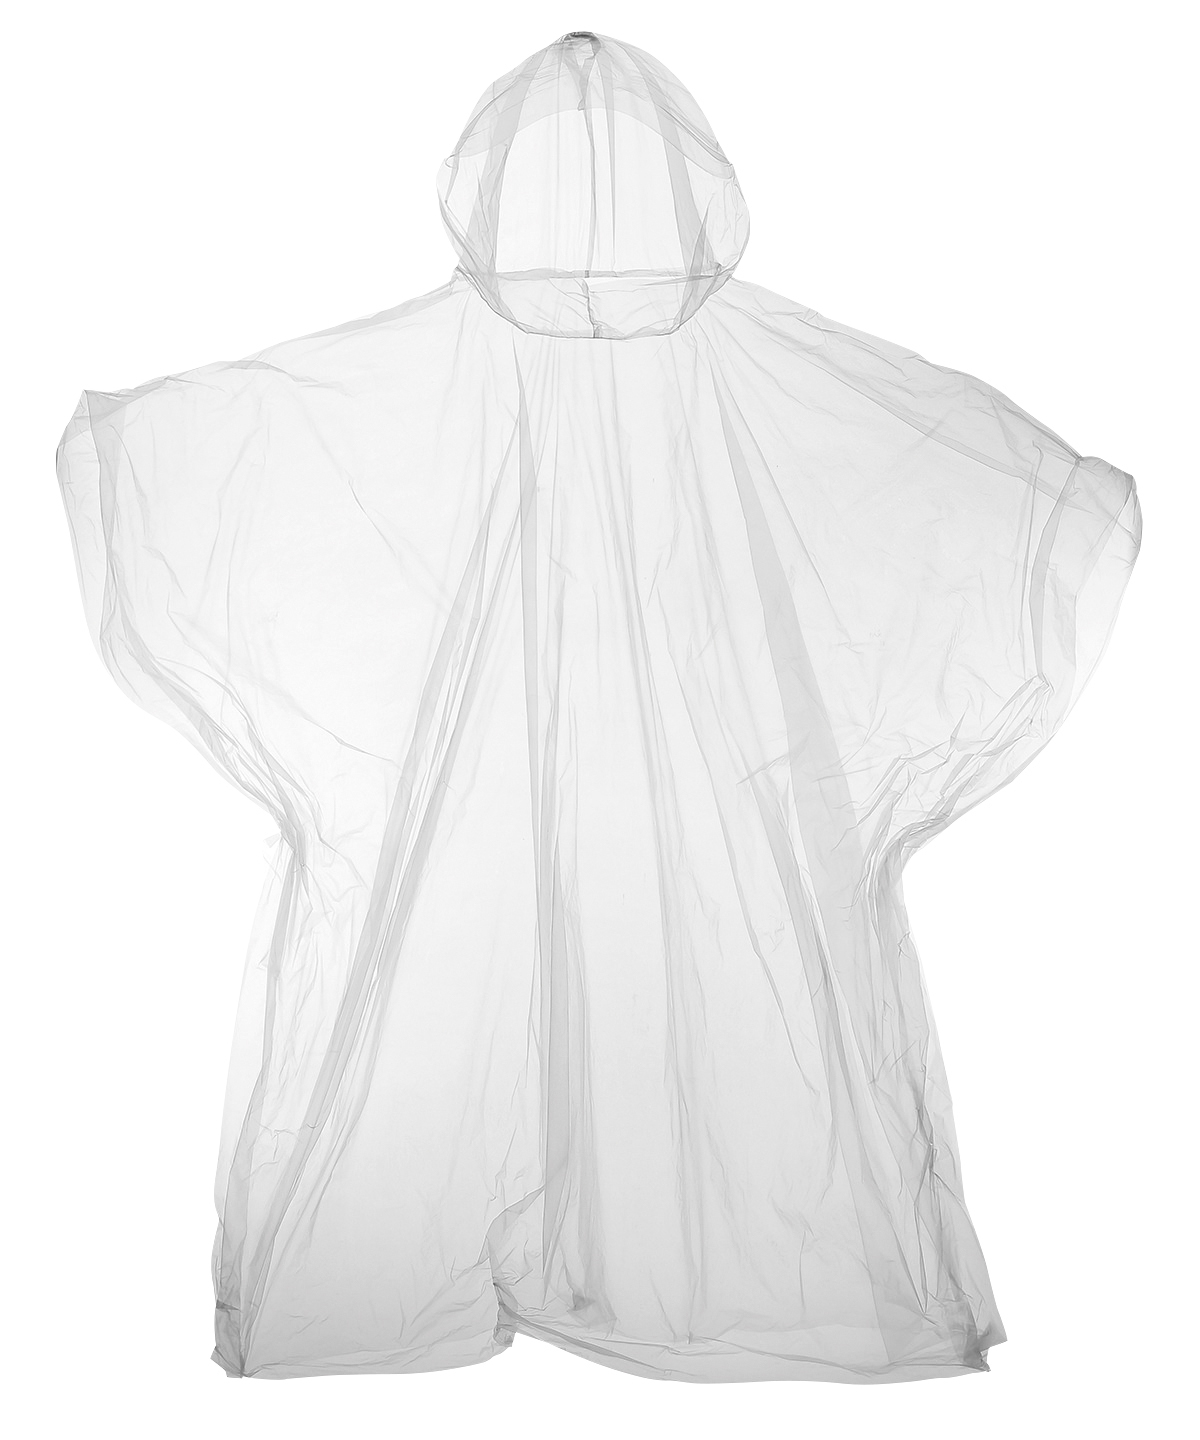 Kids Emergency Hooded Plastic Poncho Clear Size One Size